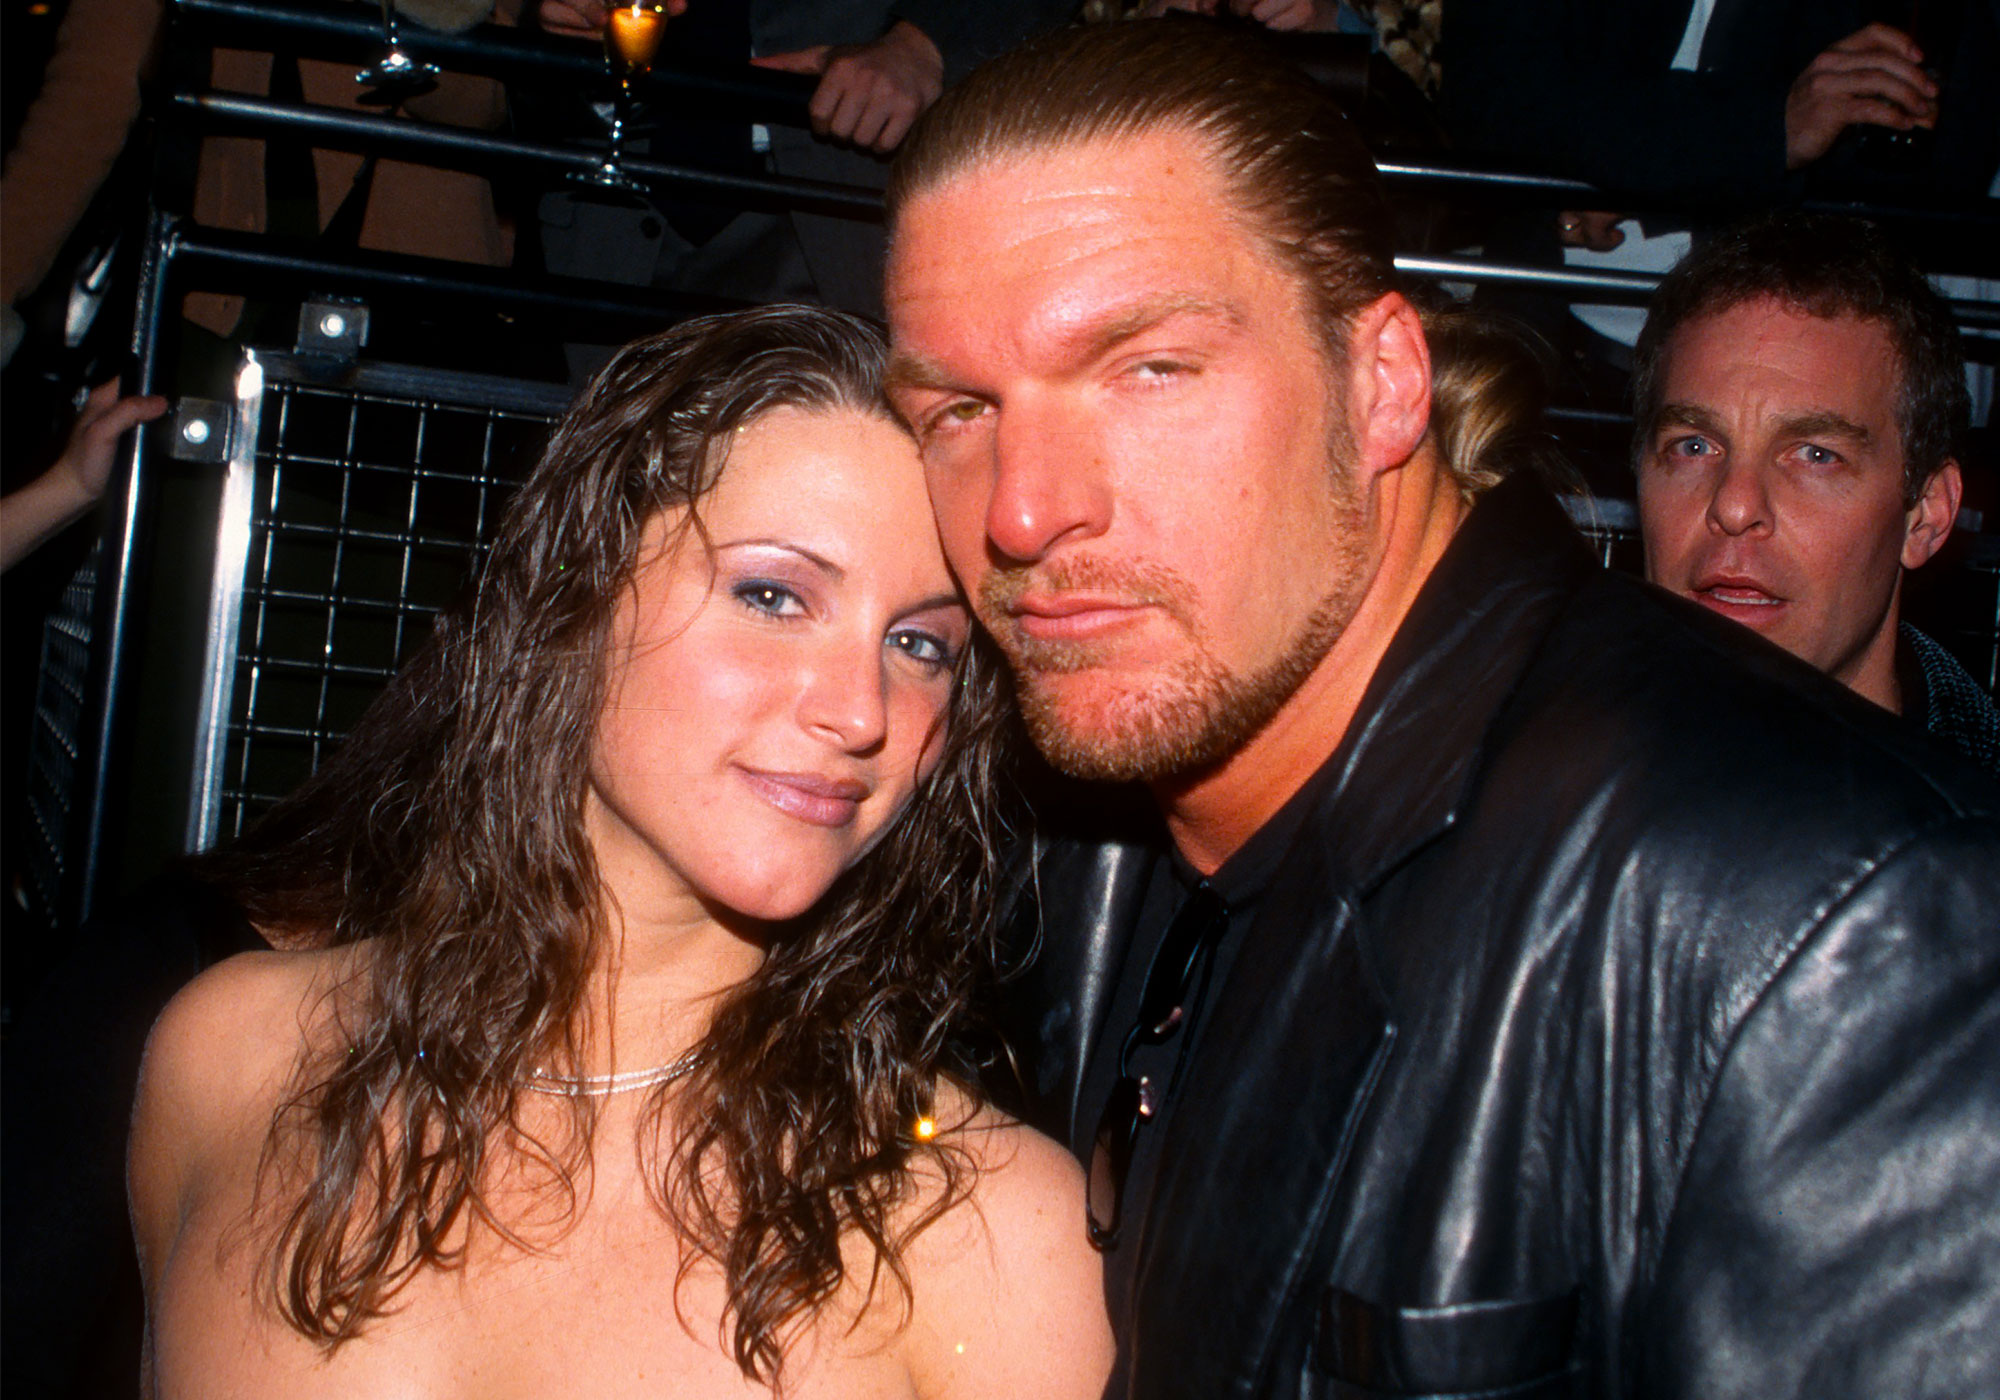 Stephanie Mcmahon Hot Sex - WWE's Stephanie McMahon and Wrestler Triple H's Relationship Timeline